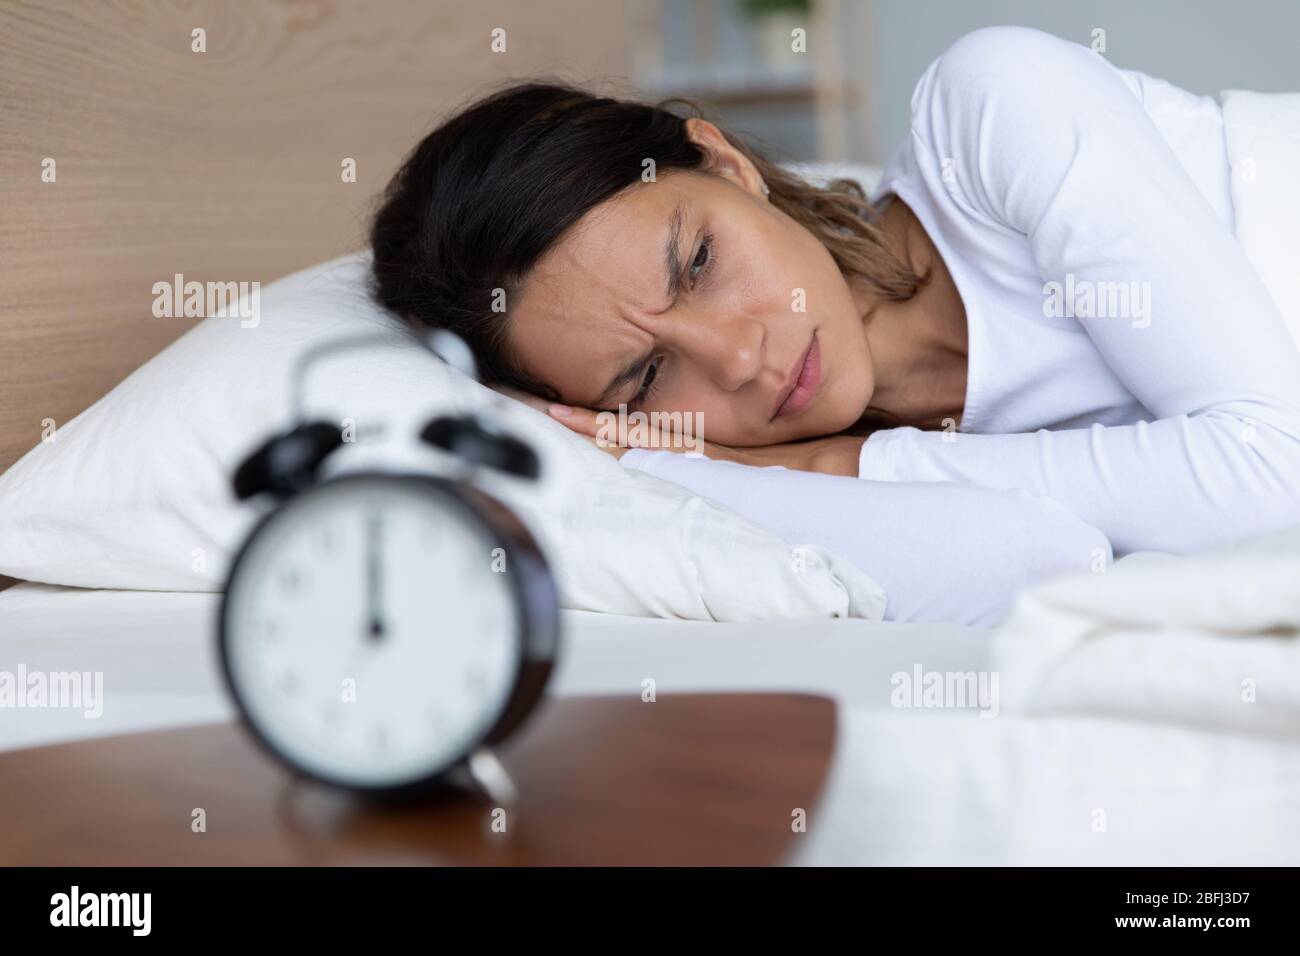 Unhappy restless woman lying in bed, suffering from insomnia Stock Photo